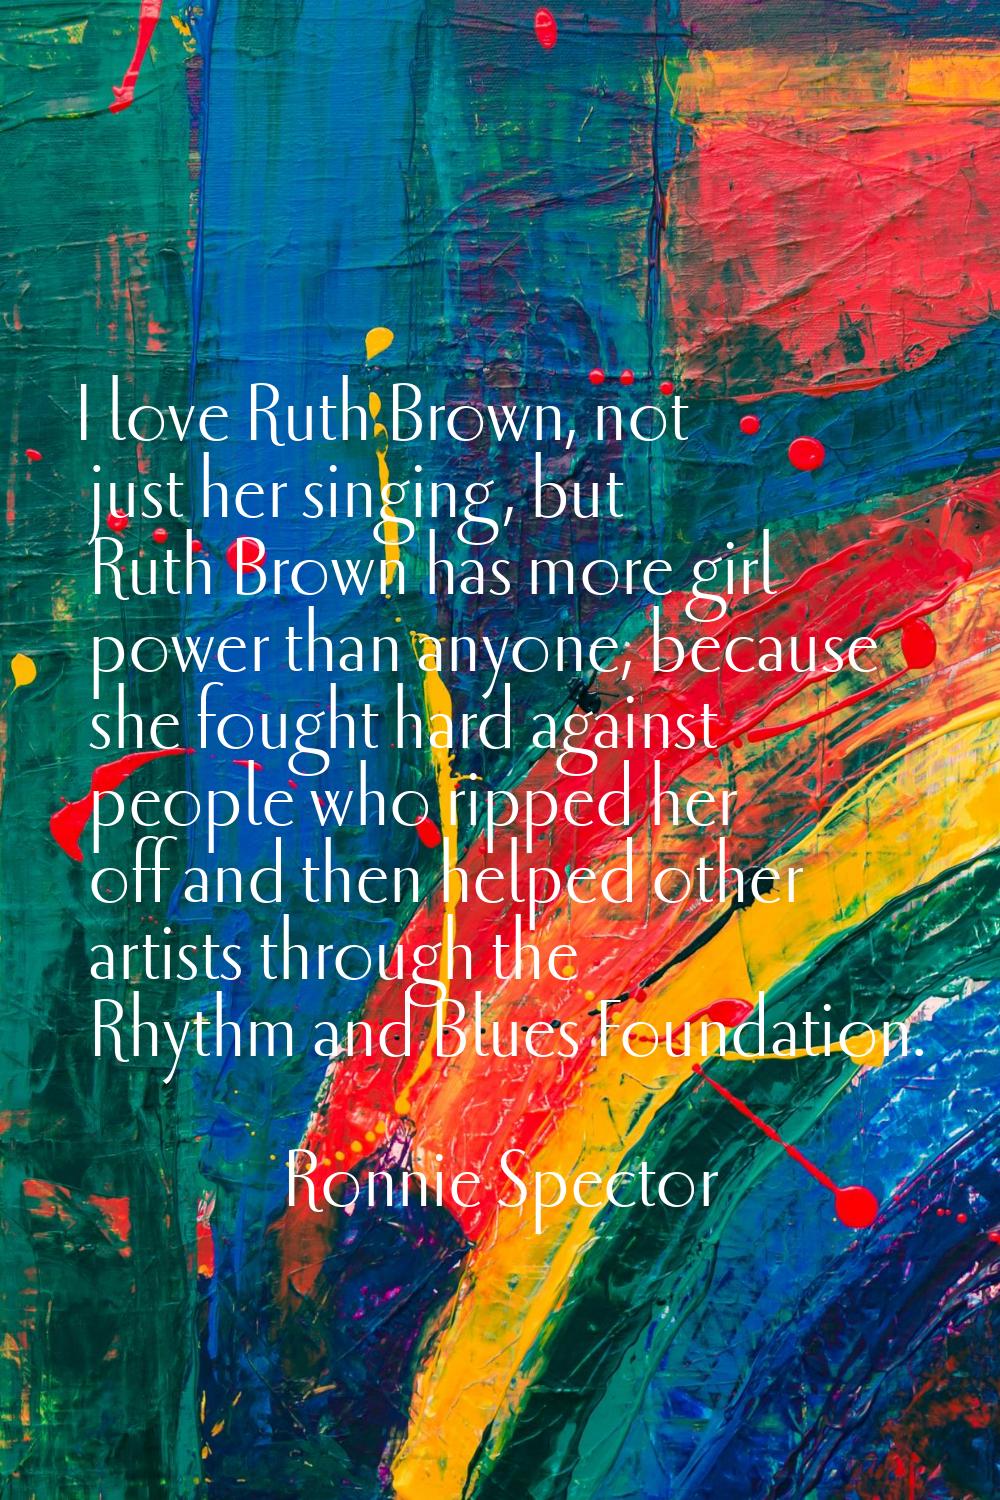 I love Ruth Brown, not just her singing, but Ruth Brown has more girl power than anyone, because sh